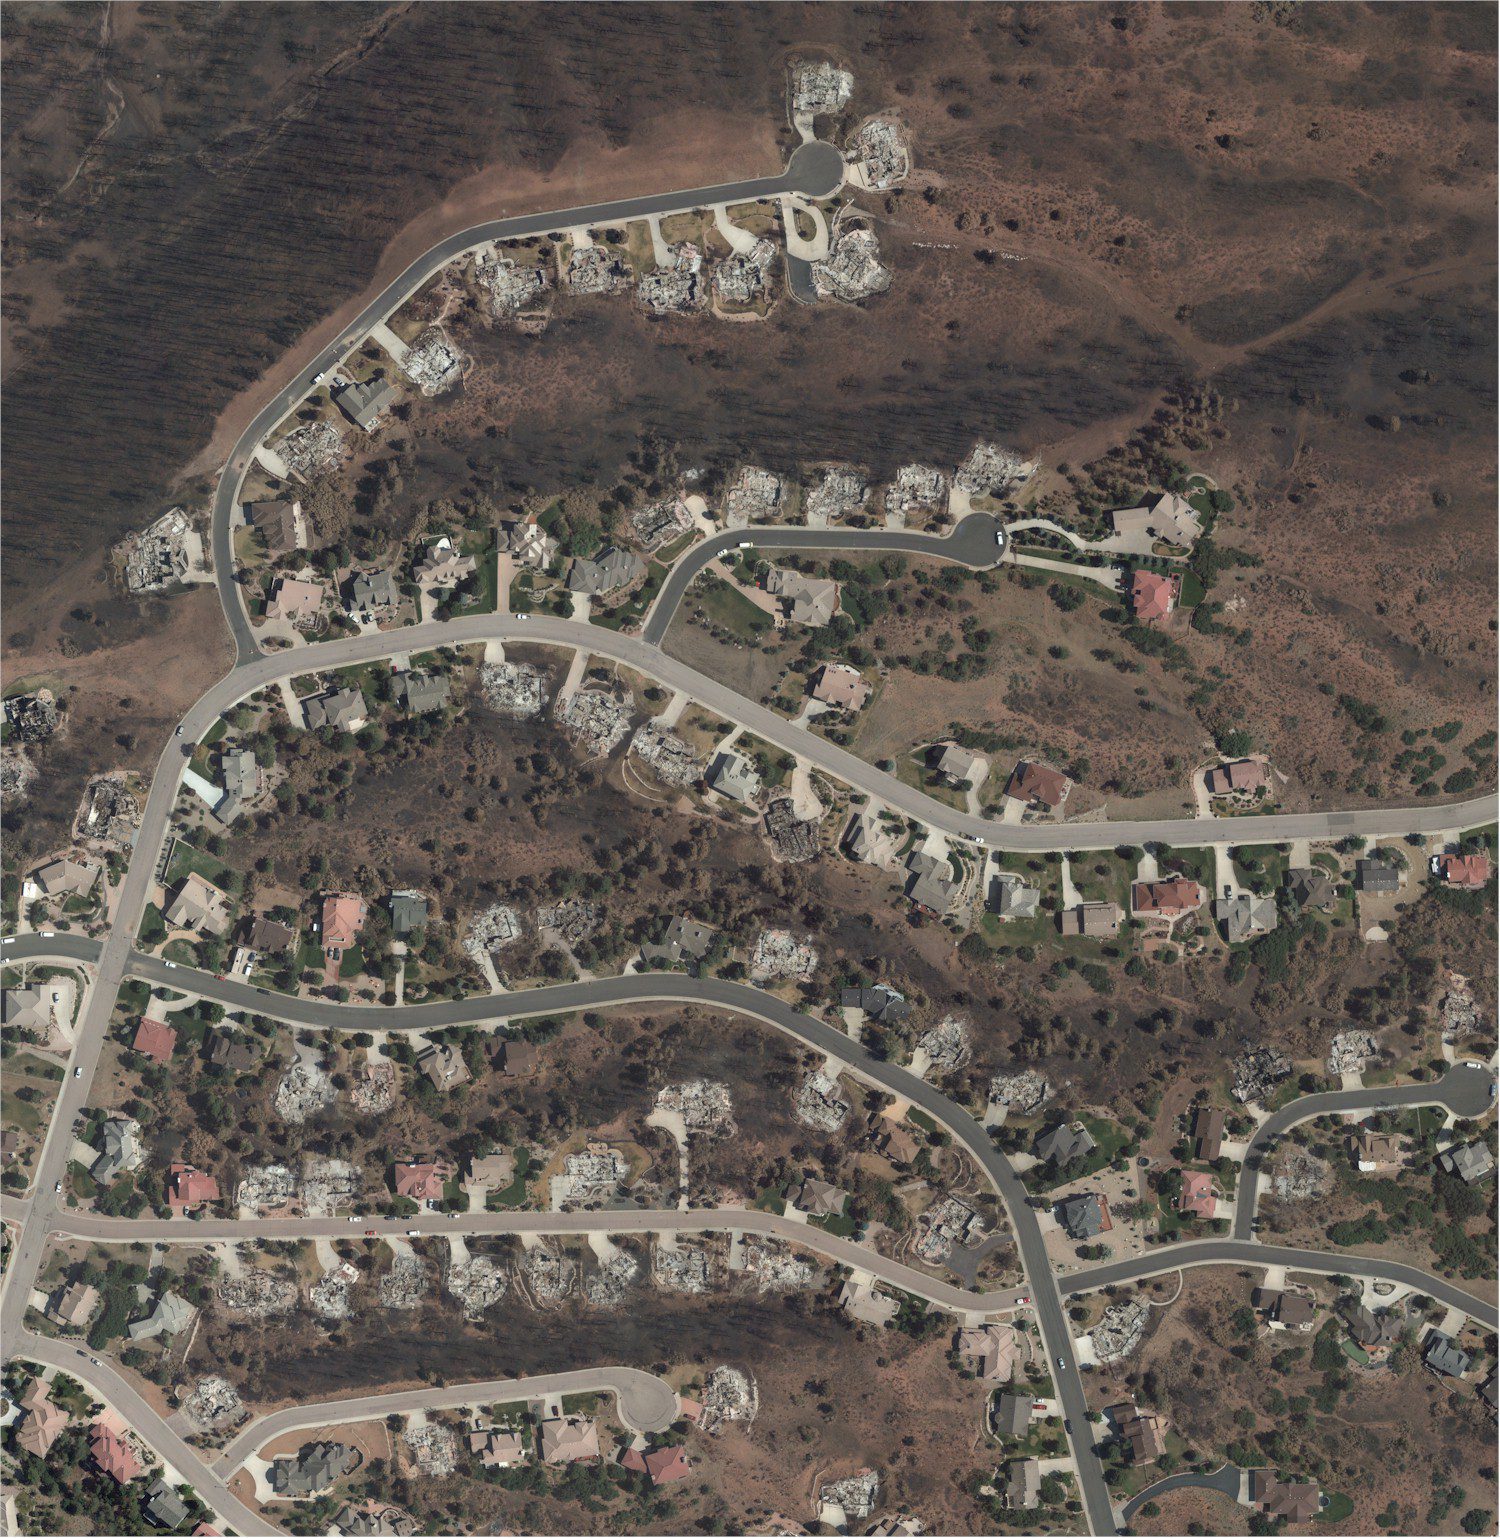 Intriguing Images of 2012 « Earth Imaging Journal: Remote Sensing